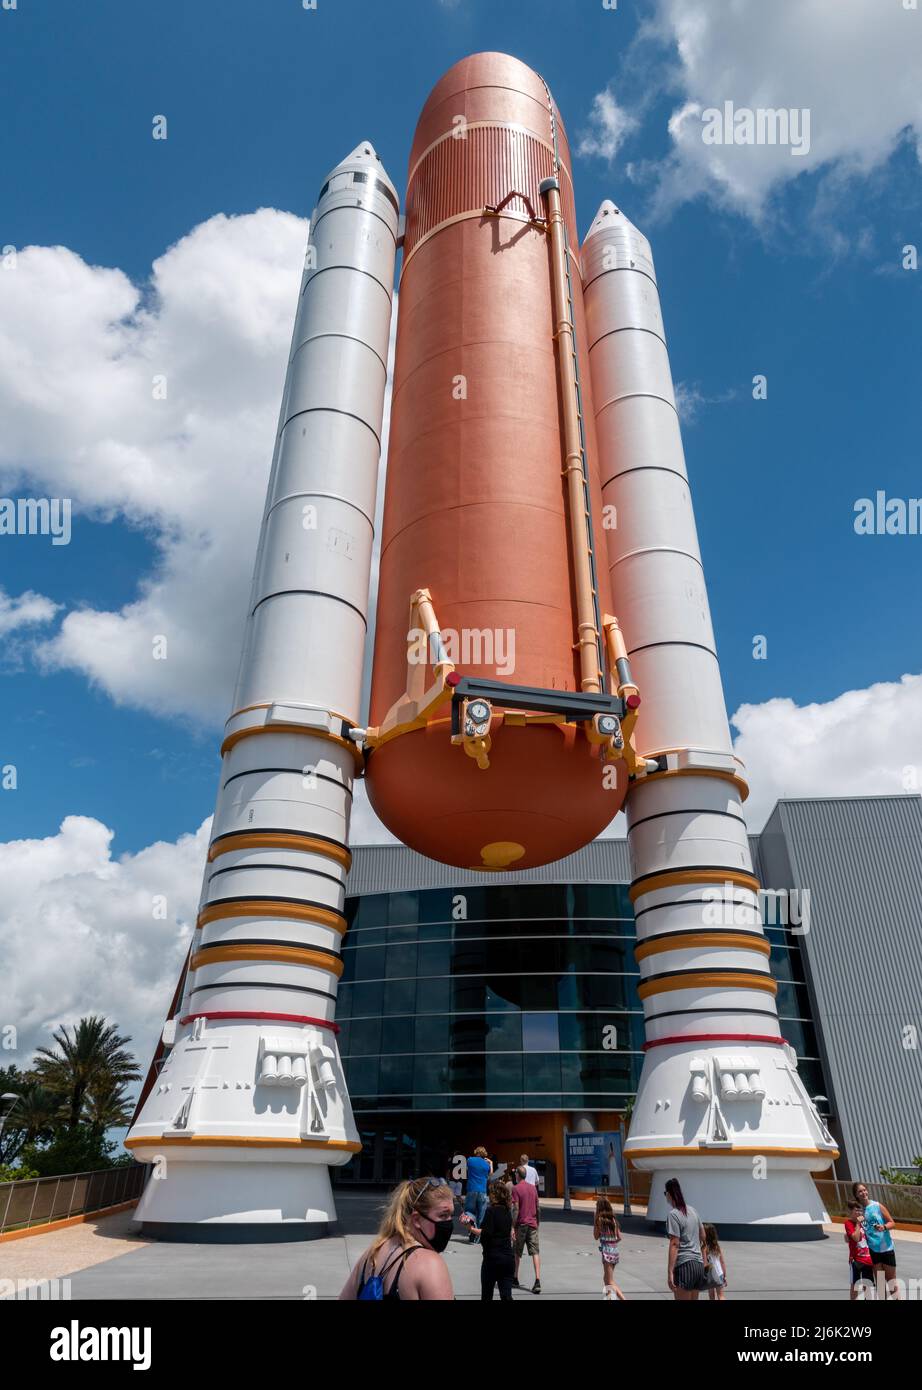 The solid and liquid rocket boosters from the space shuttle Atlantis Stock Photo